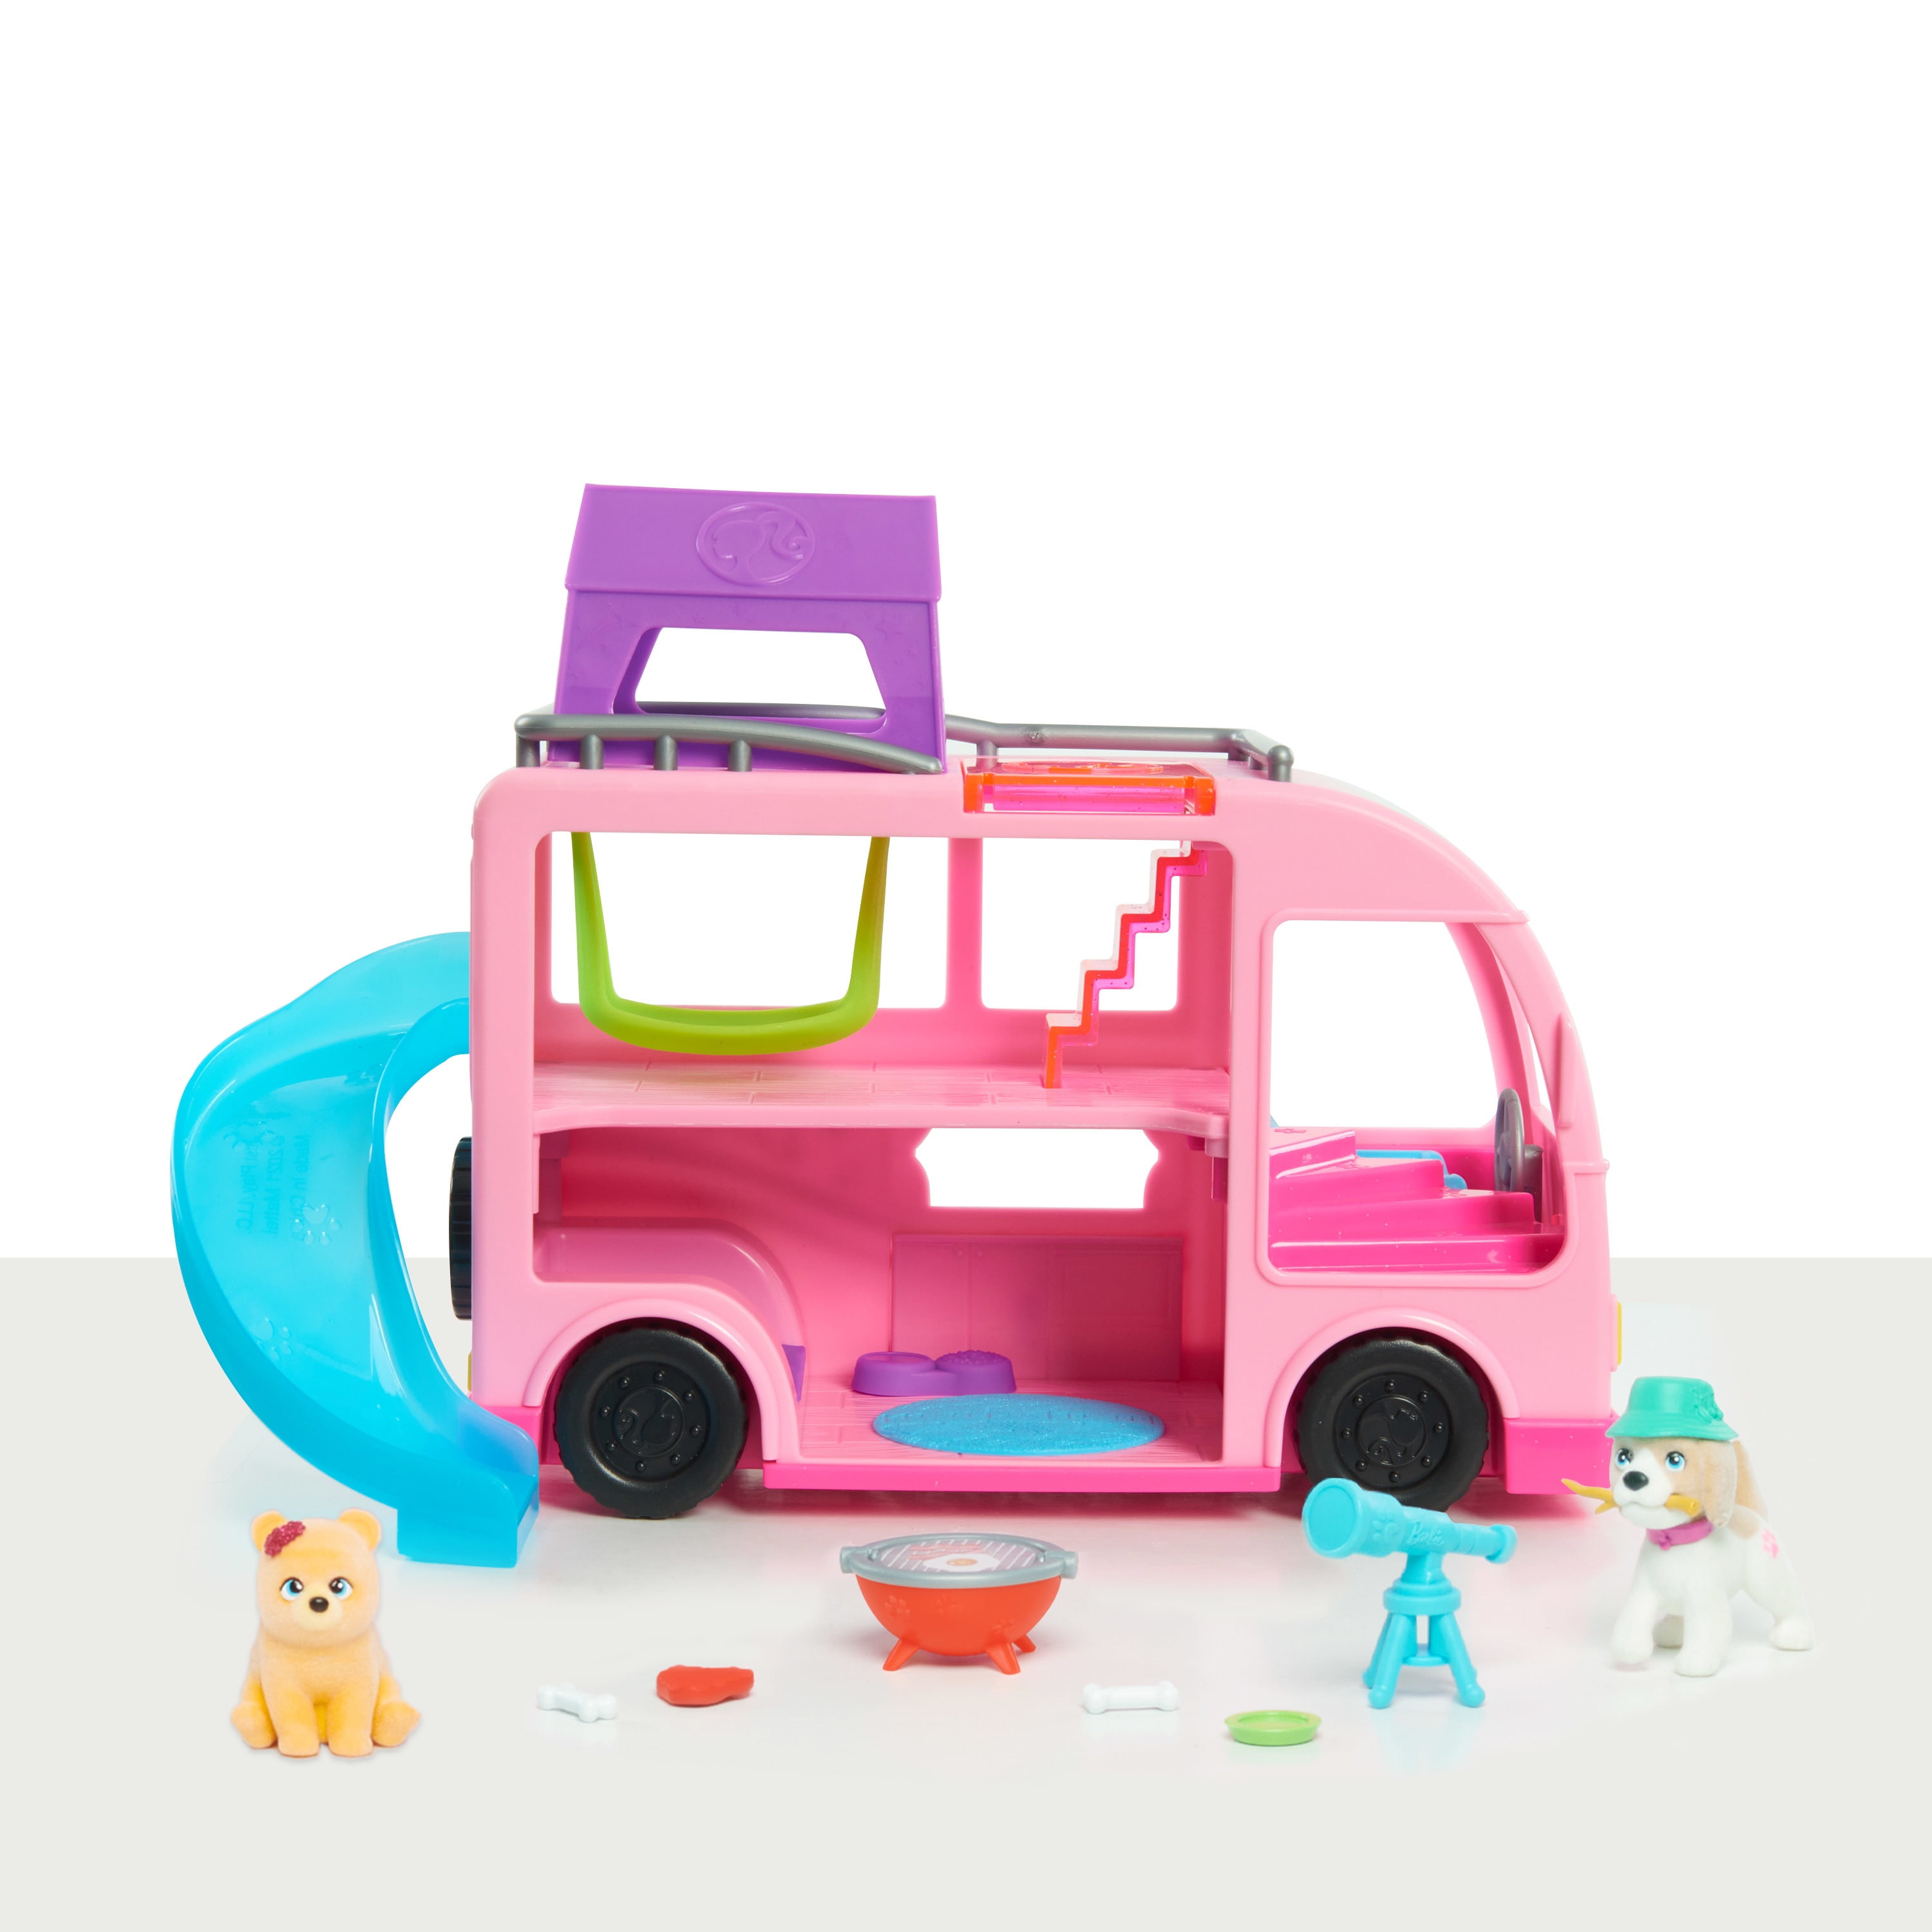 kalender Accumulatie Kilauea Mountain Barbie Pet Camper, 11-pieces, Toy Figures and Playset, Kids Toys for Ages 3  Up, Gifts and Presents - Walmart.com